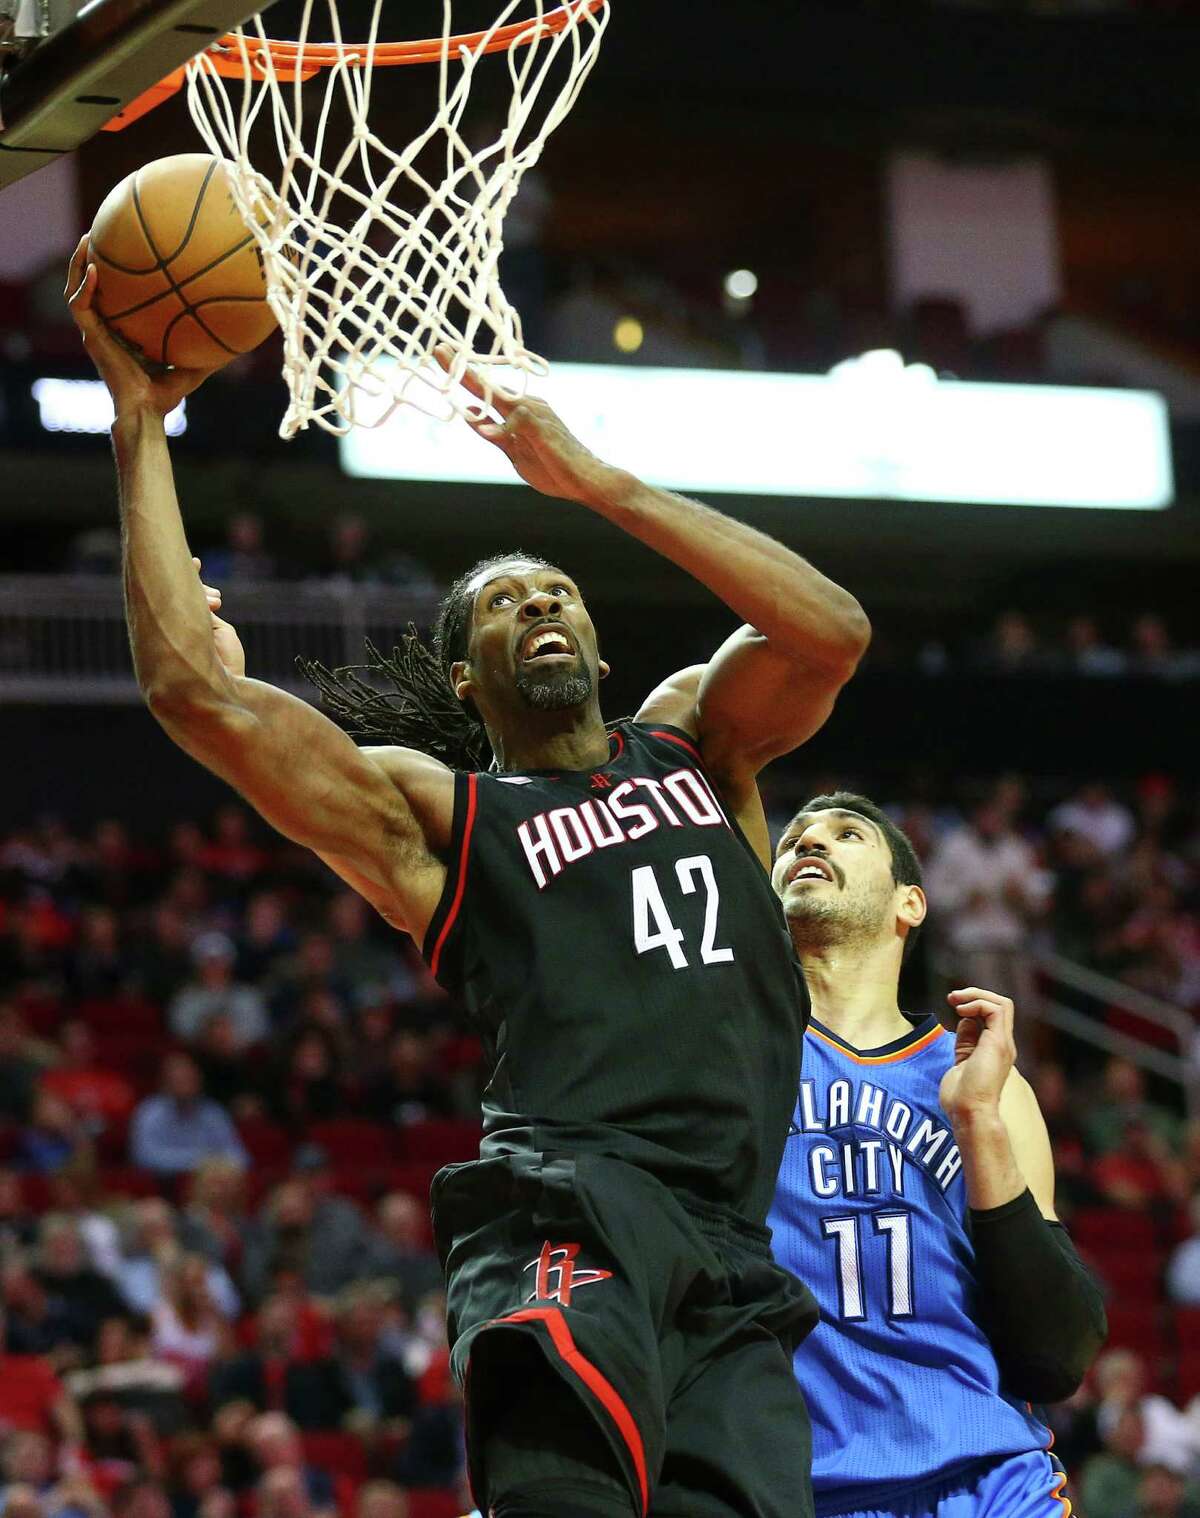 Nene attacks the basket for the Rockets during Thursday night's 118-116 win over the Thunder at Toyota Center. Nene hit all six of his shots en route to 18 points.